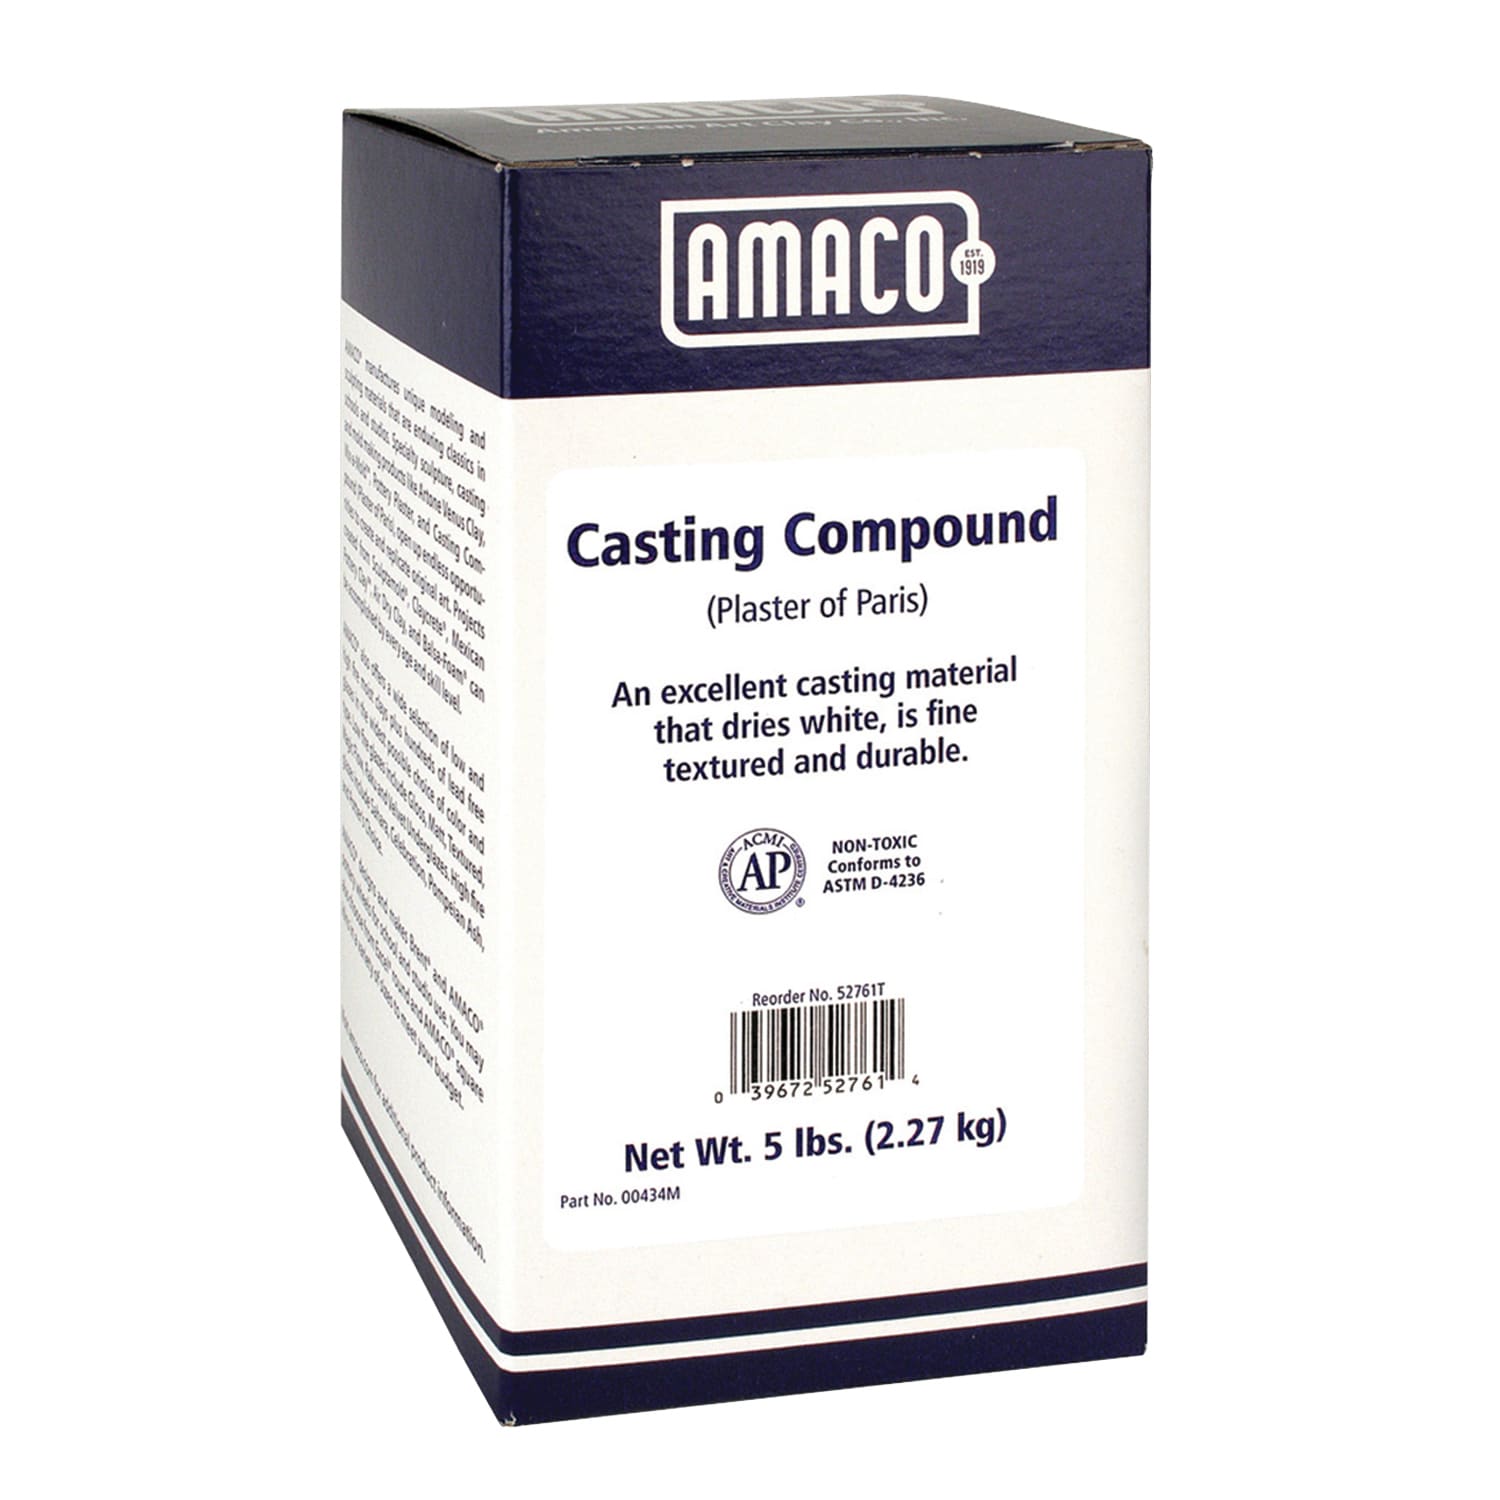 AMACO Pottery Plaster and Casting Compound 5lb